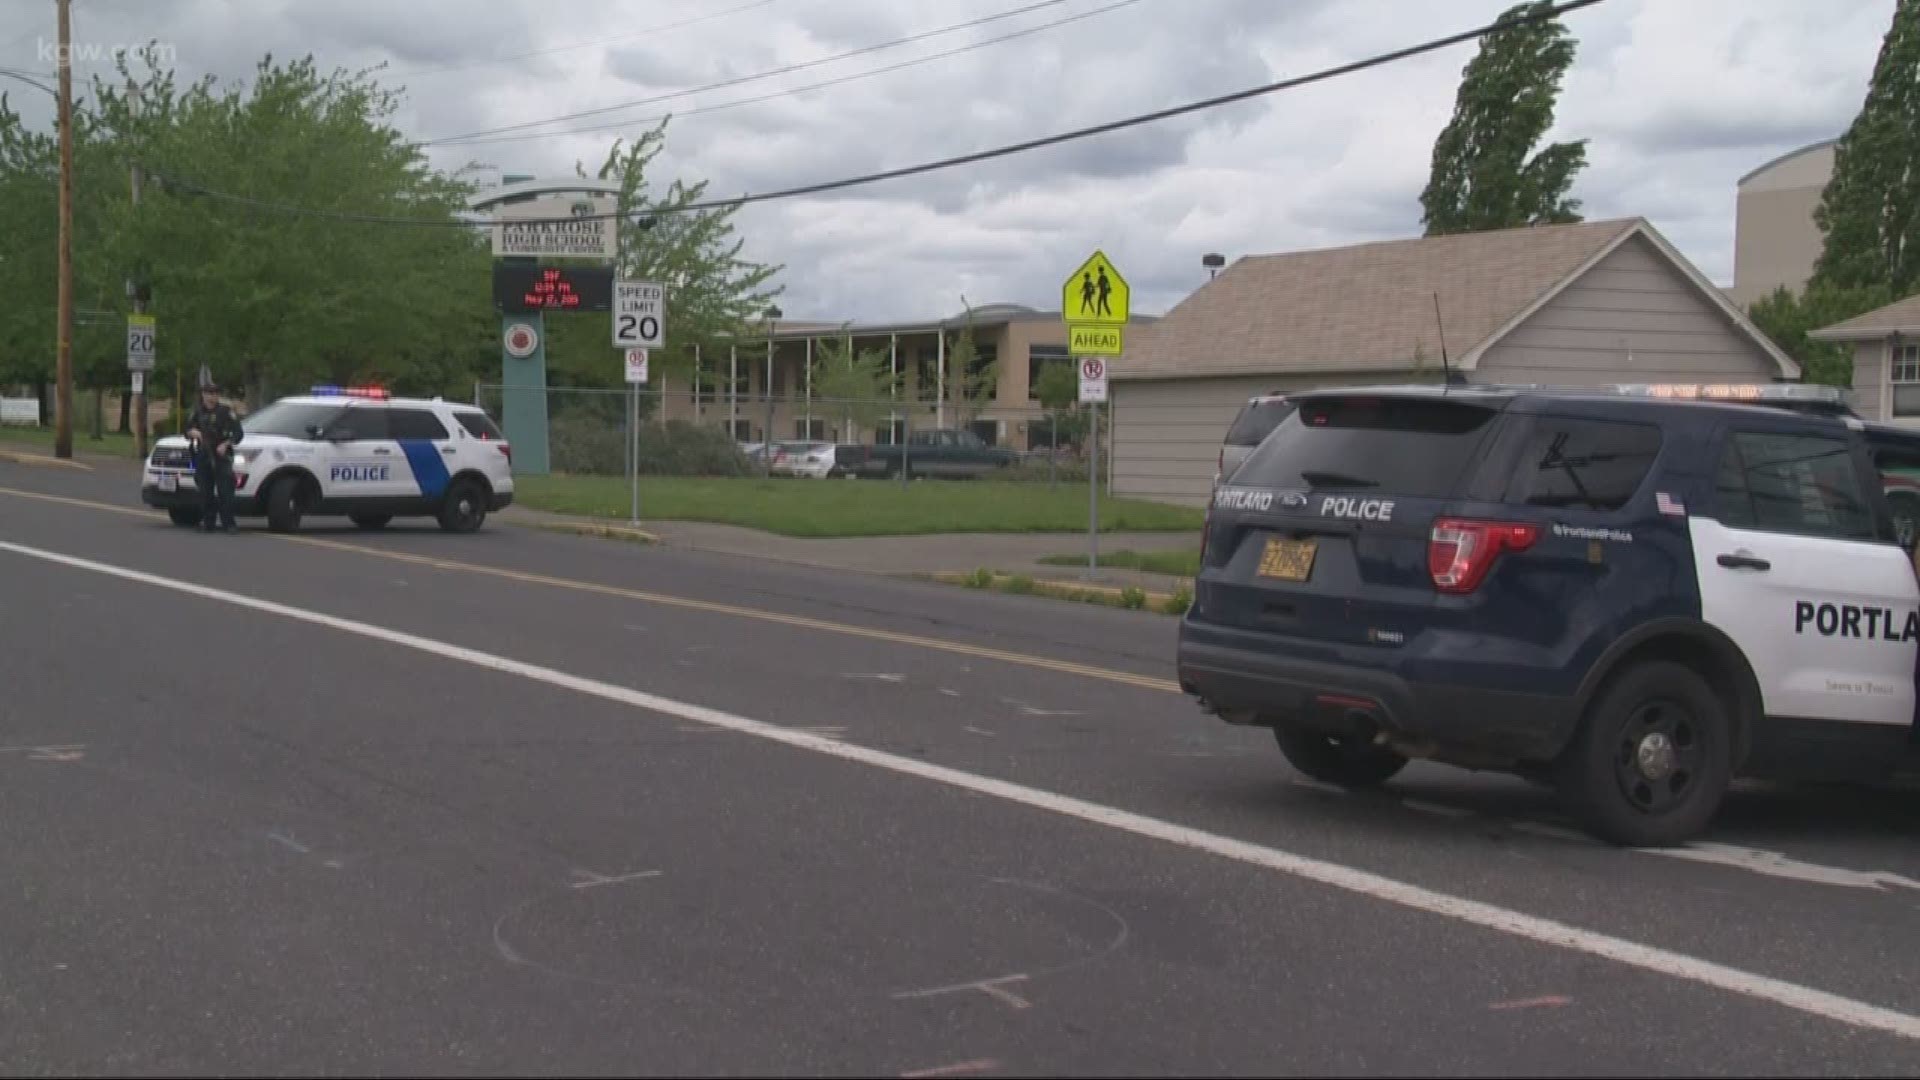 Parents rushed to Parkrose High School after learning about an armed student on campus.